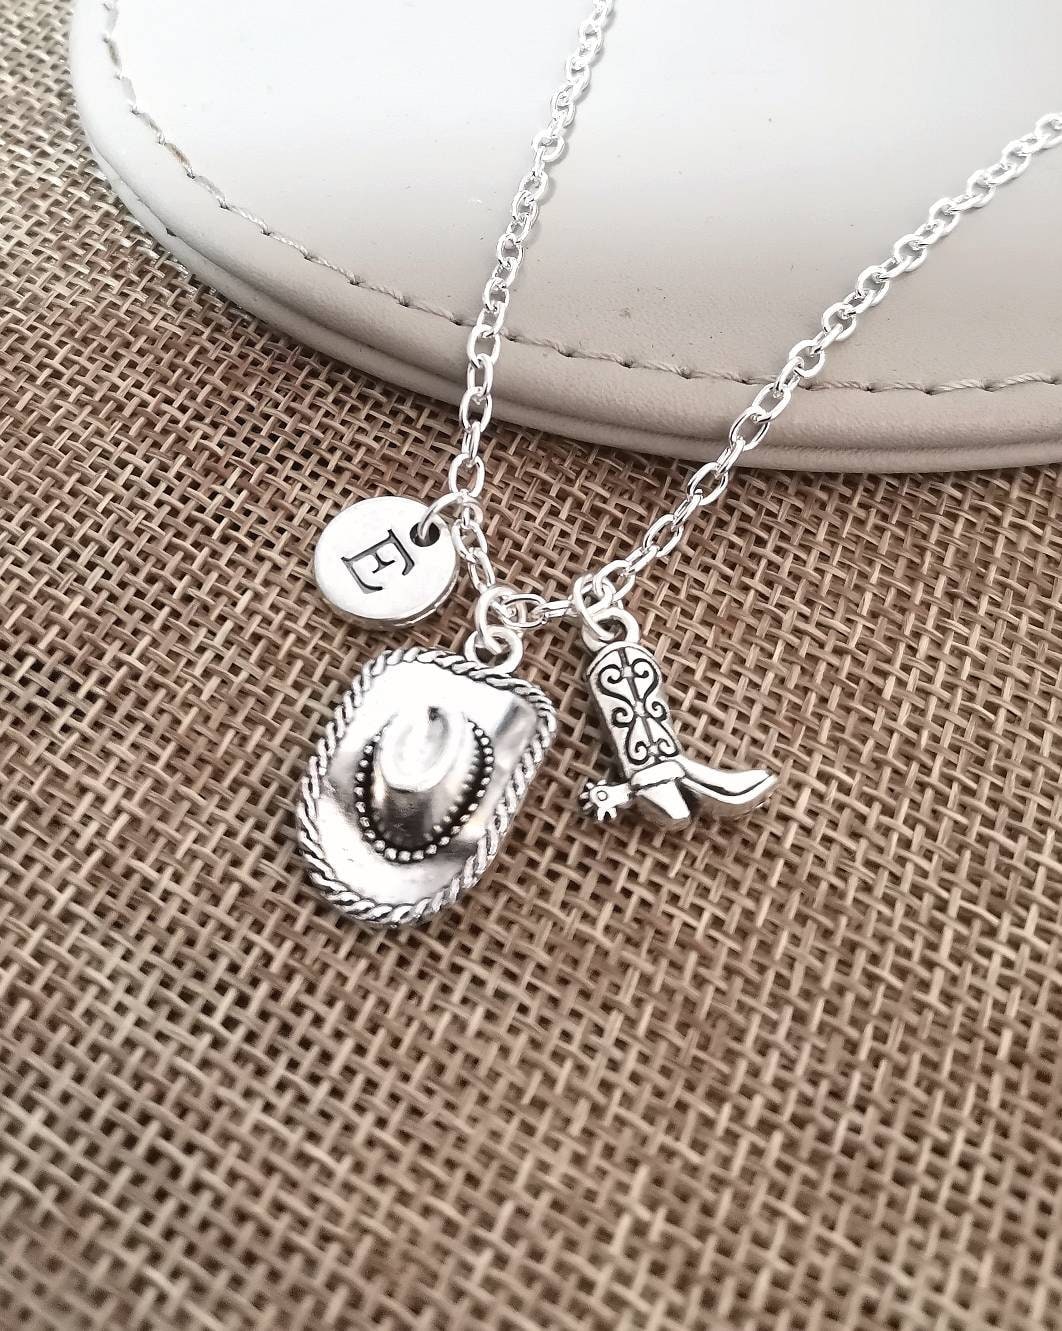 Cow Girl Necklace, Cow Boy Necklace, Cow Girl Gifts, Necklace Cowgirl, Texas, Mexico, Mexican, Texan, Western, Country Girl, Boots, Boot